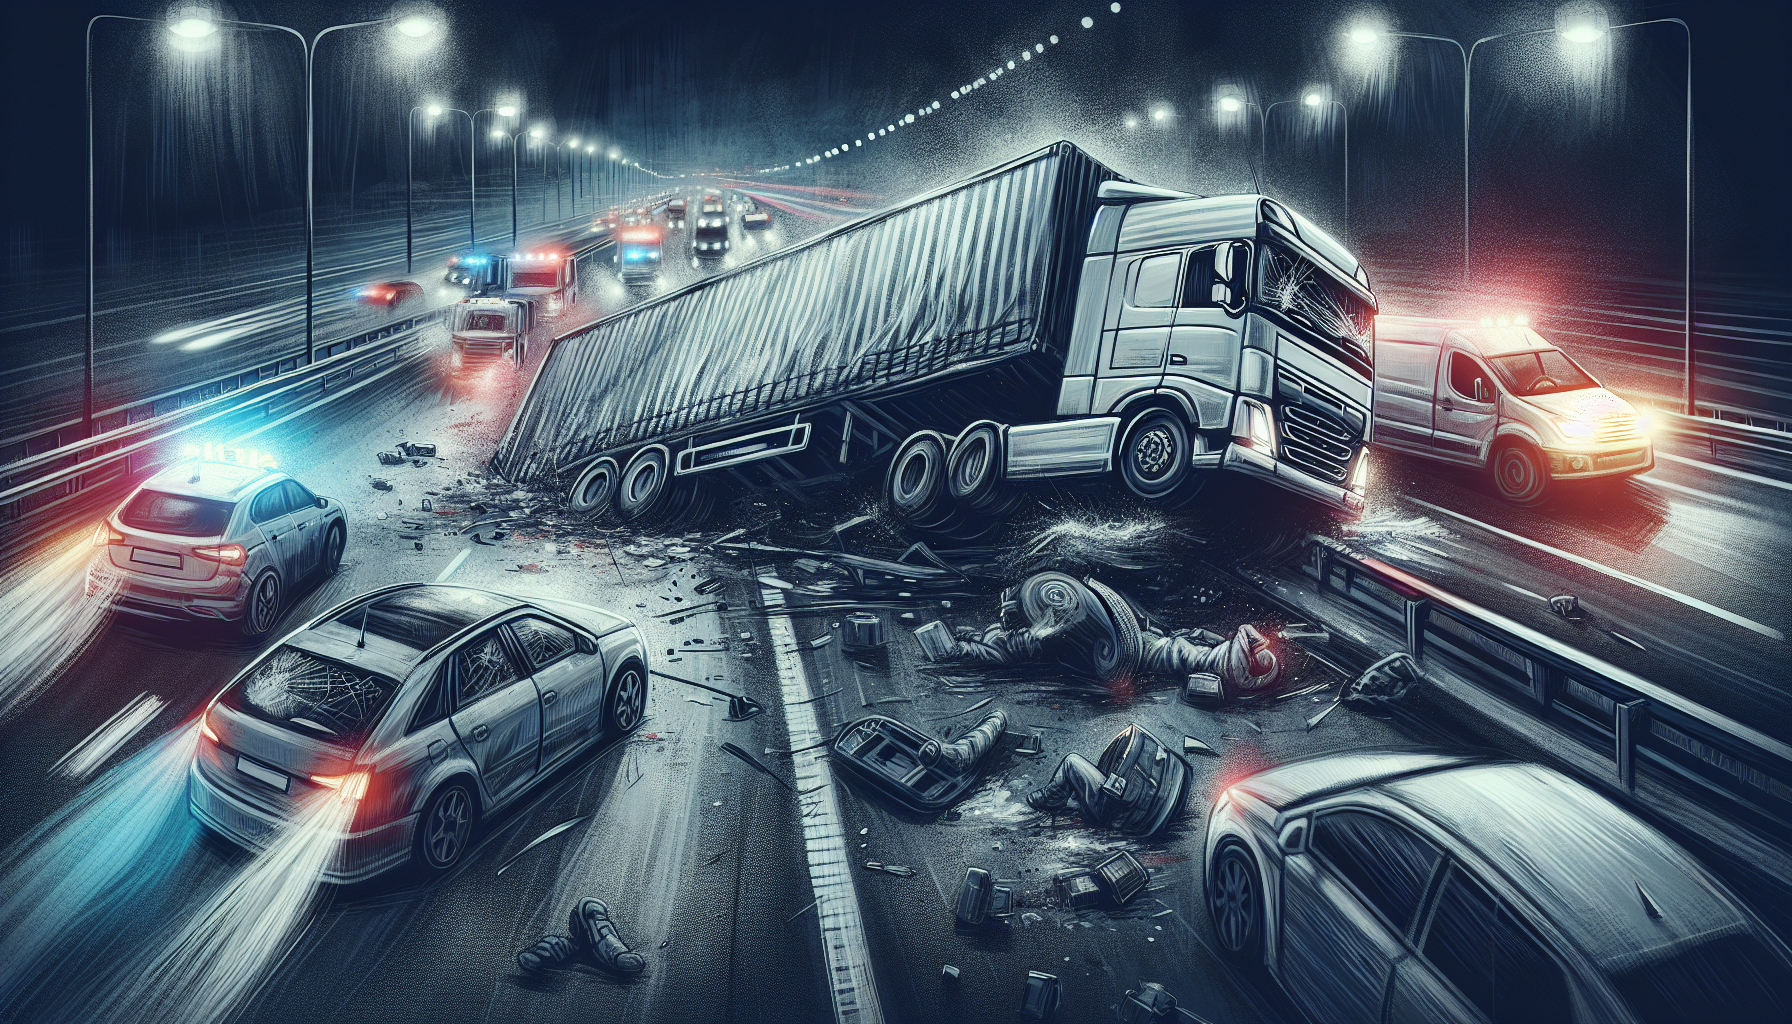 Illustration of a truck accident on a highway